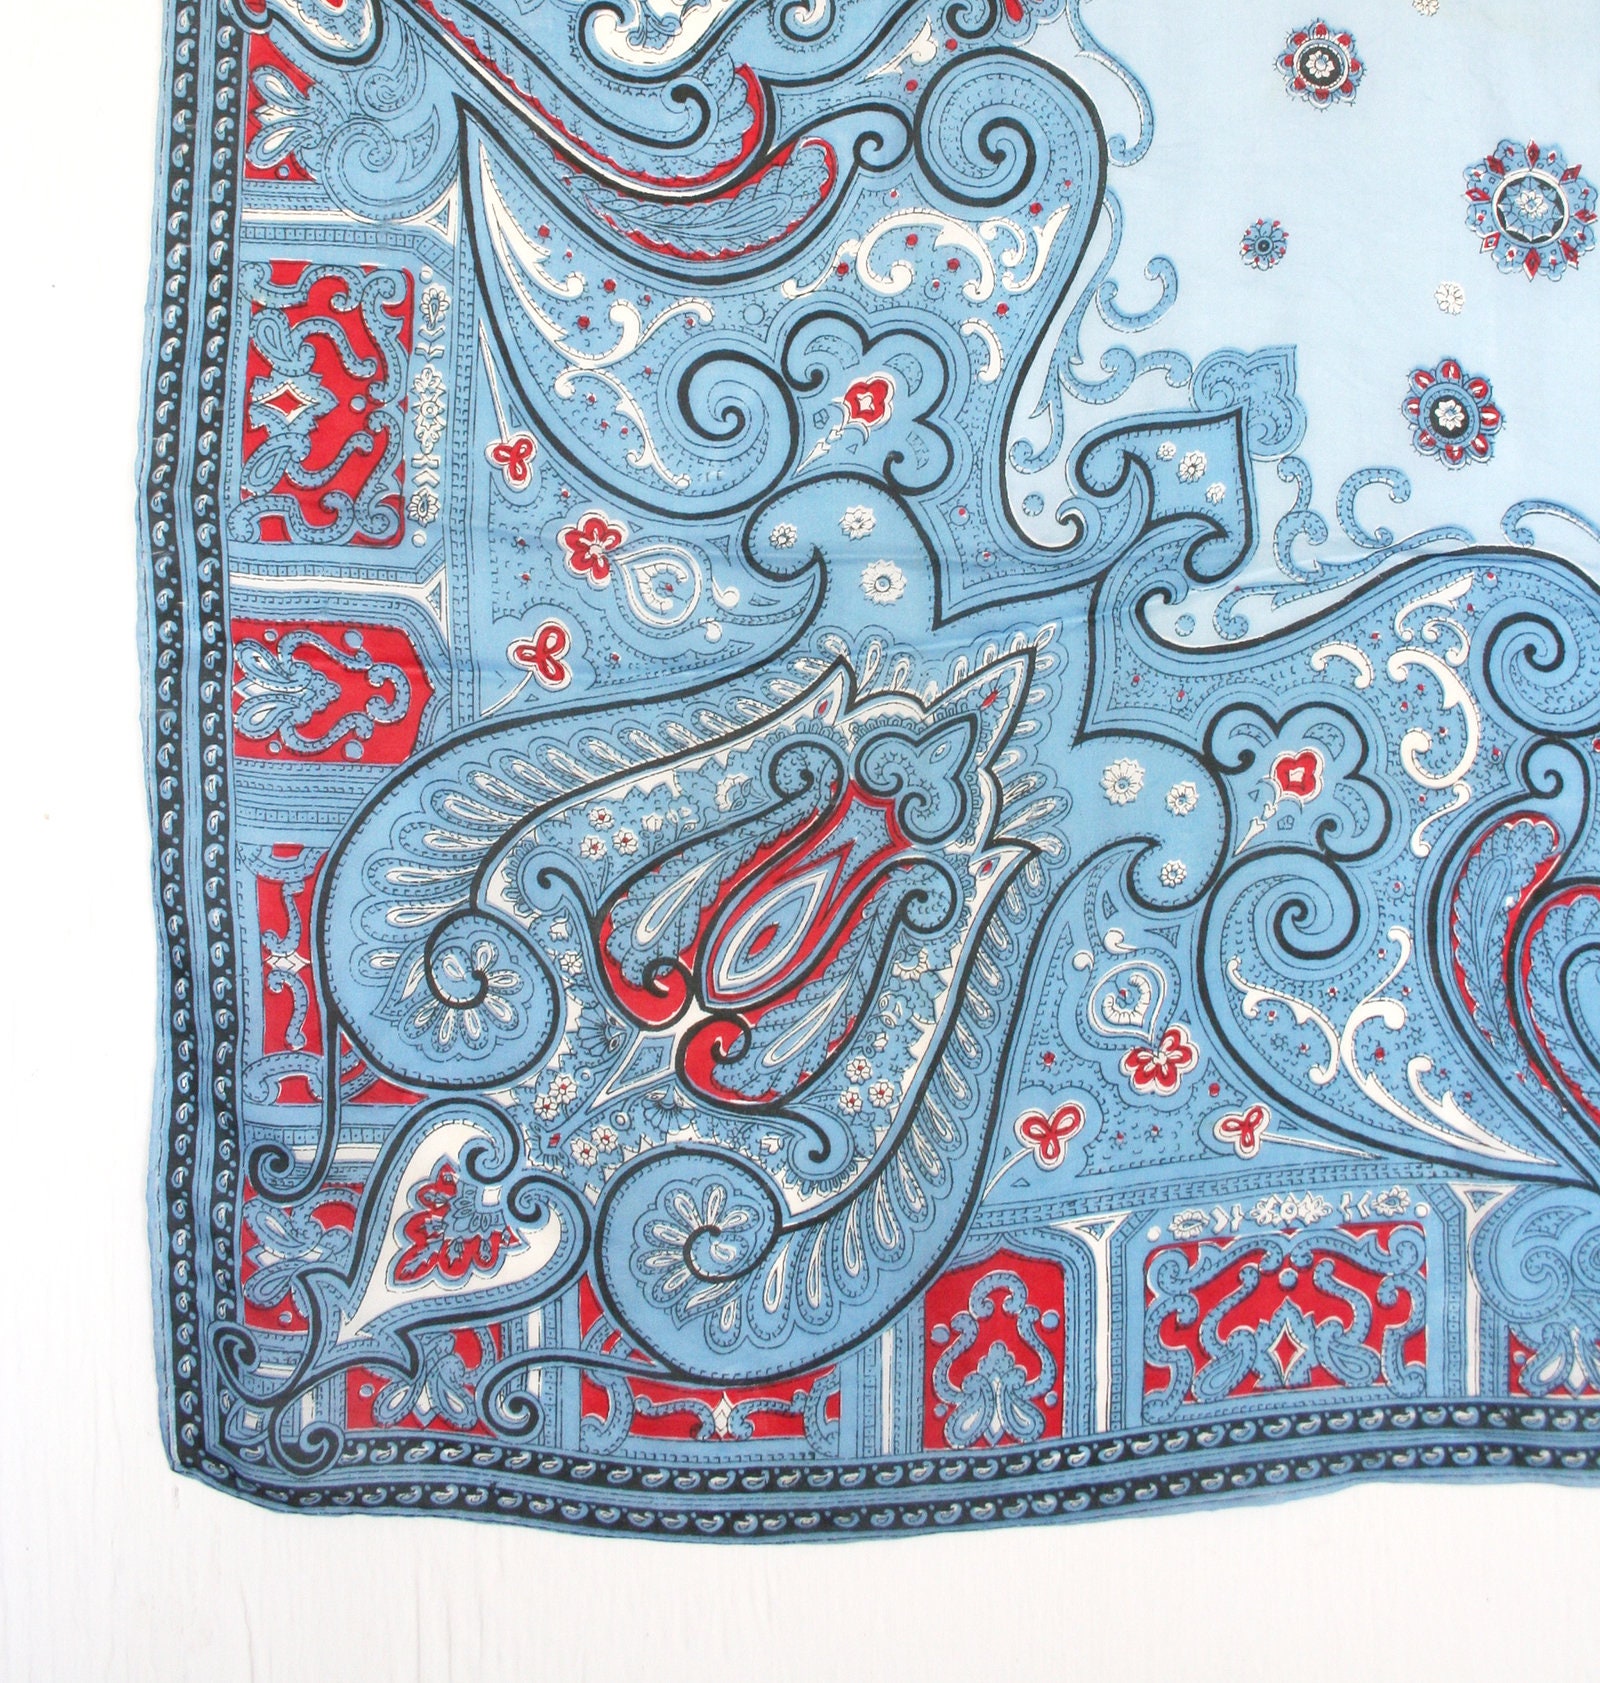 Boho Silk Blend Scarf From Japan. Paisley Print Scarf, Ornate Blue Red Black Traditional Pattern, Large